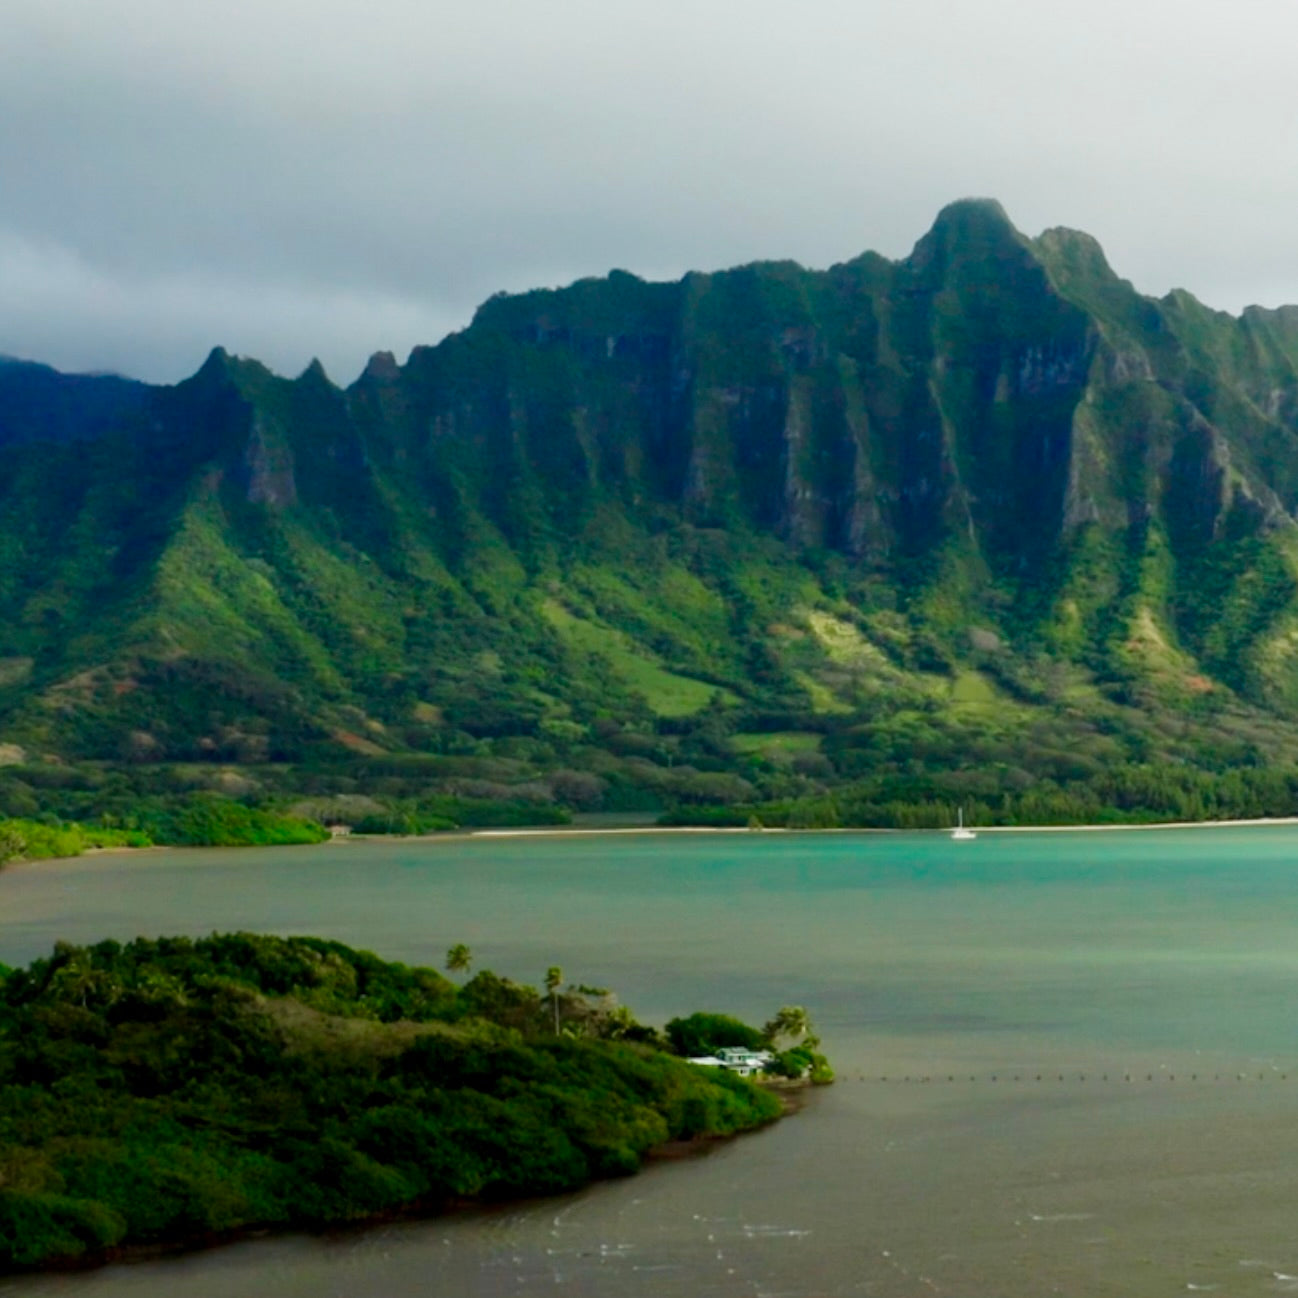 Mountains on the windward side of Oahu